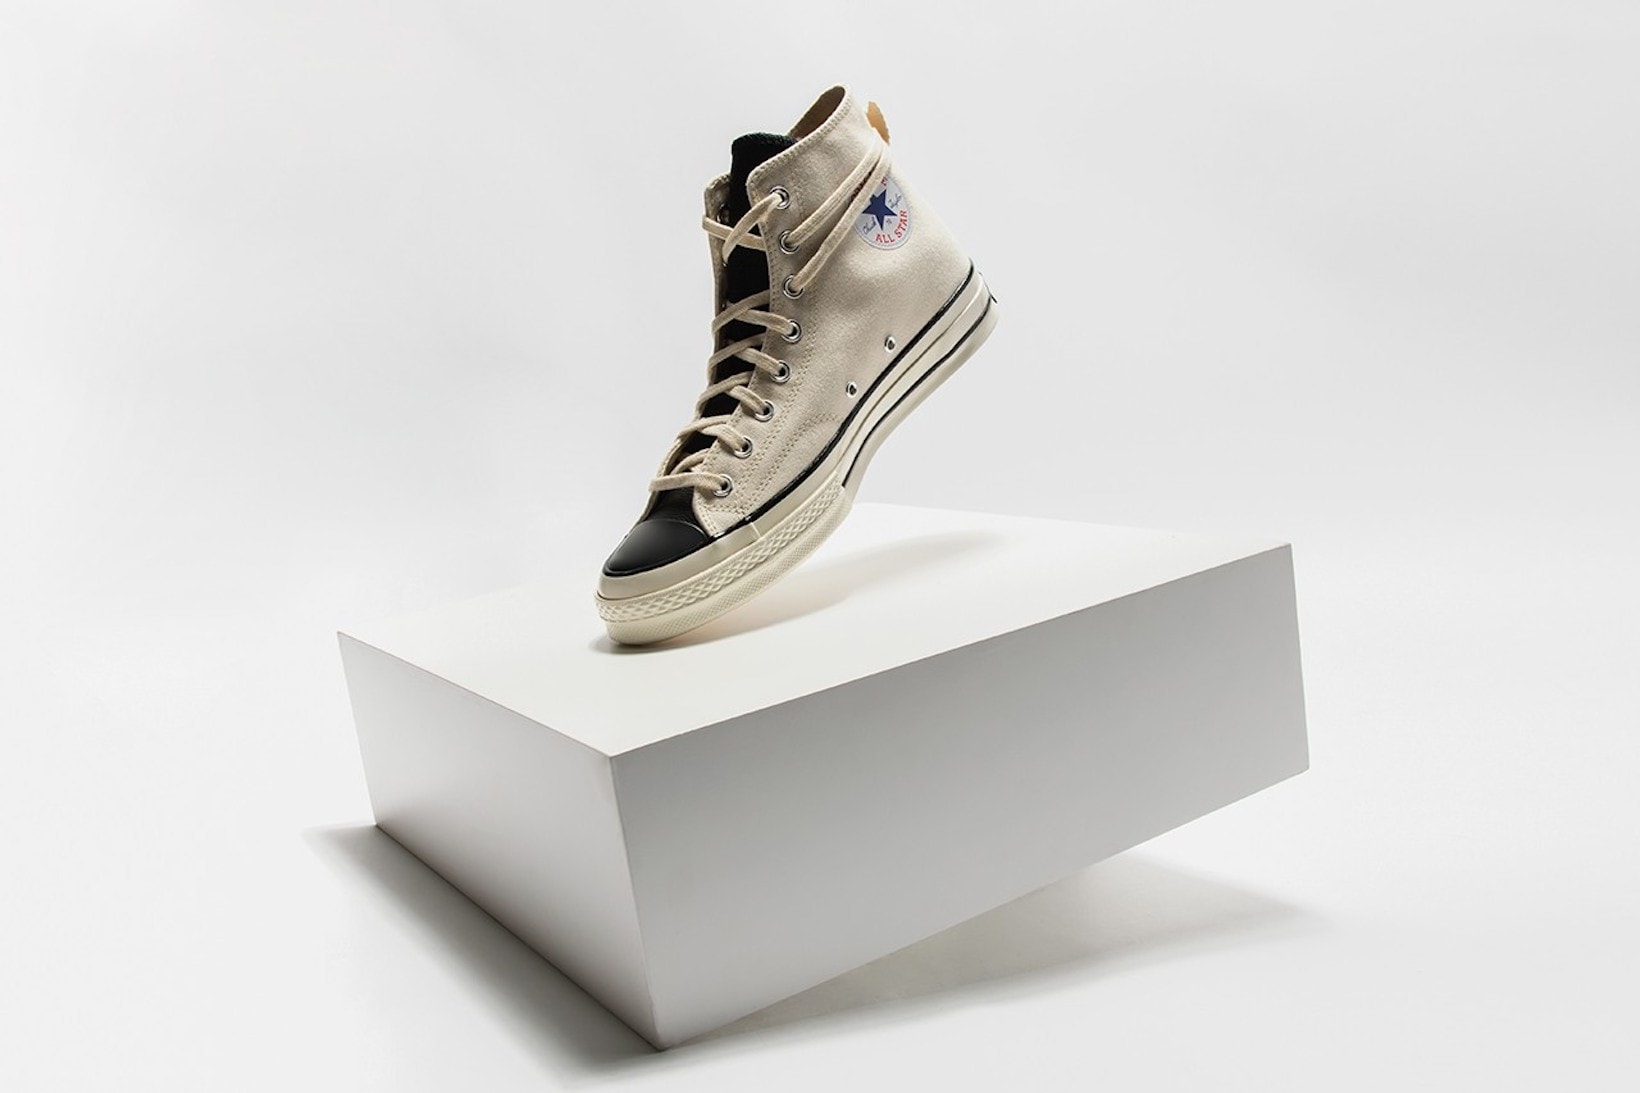 converse fear of god essentials collaboration chuck 70 sneakers black white shoes footwear sneakerhead jerry lorenzo